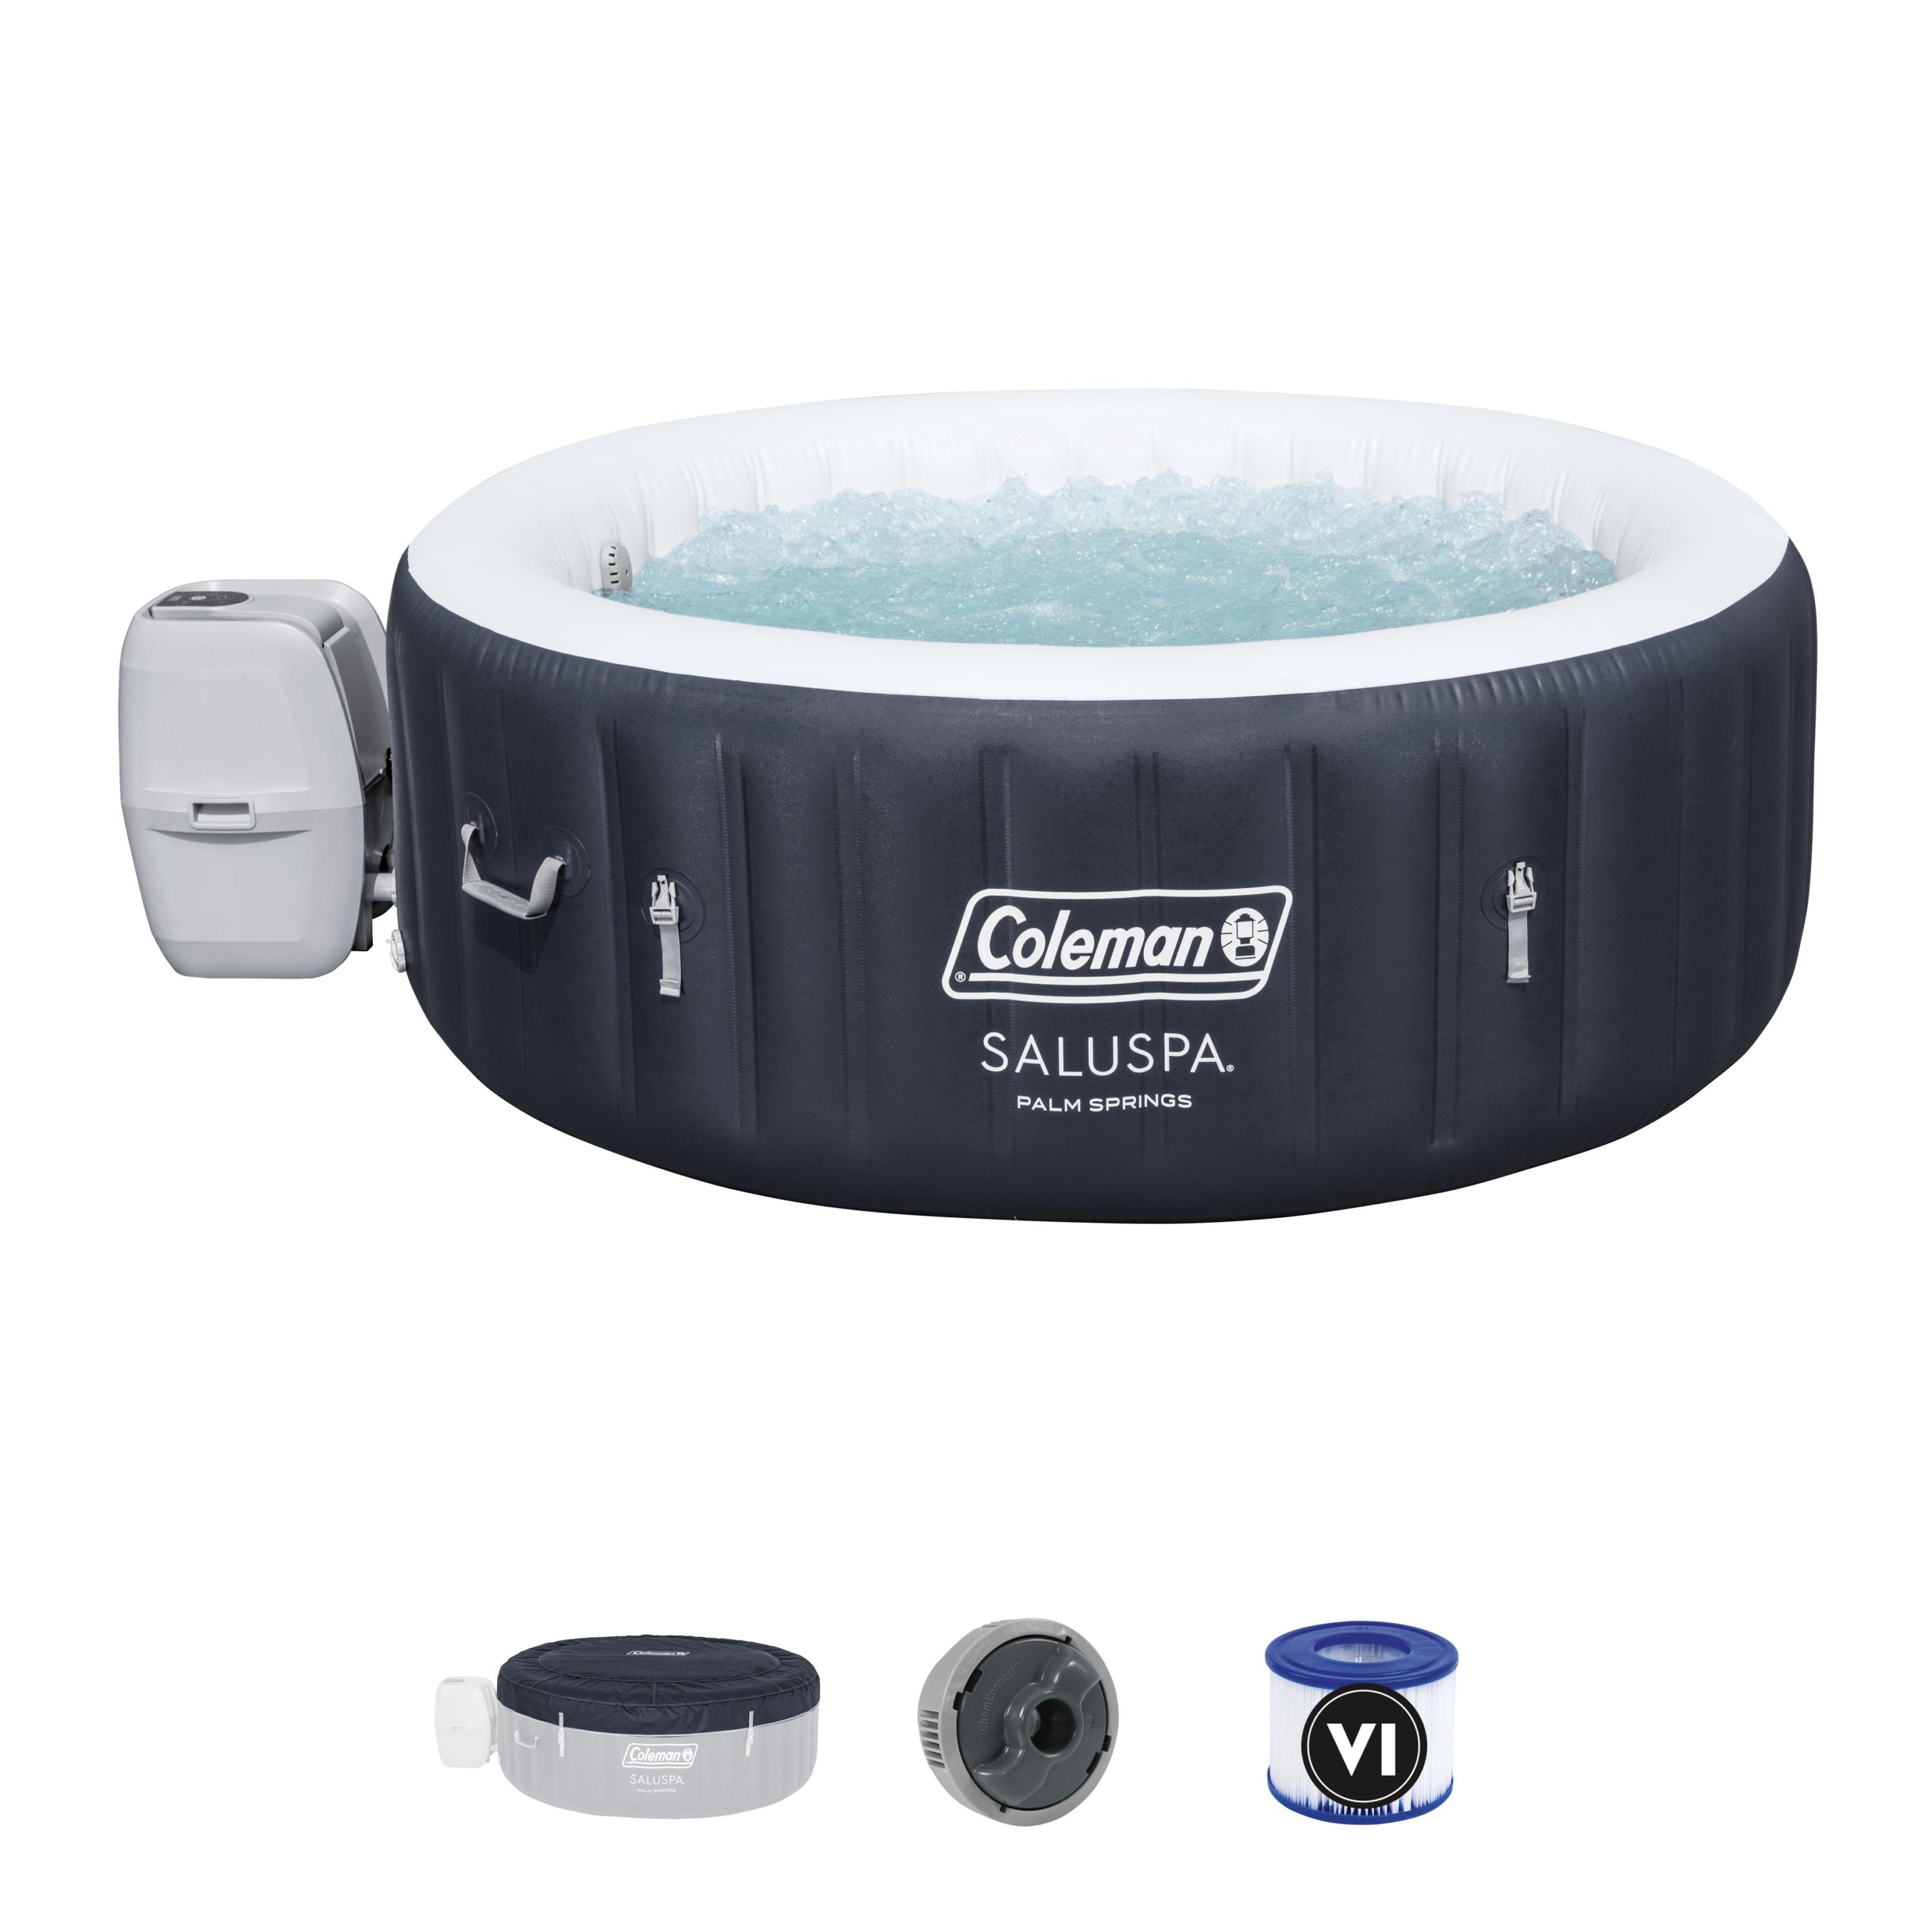 Coleman Palm Springs AirJet Inflatable Hot Tub Spa 4-6 person - image 3 of 8